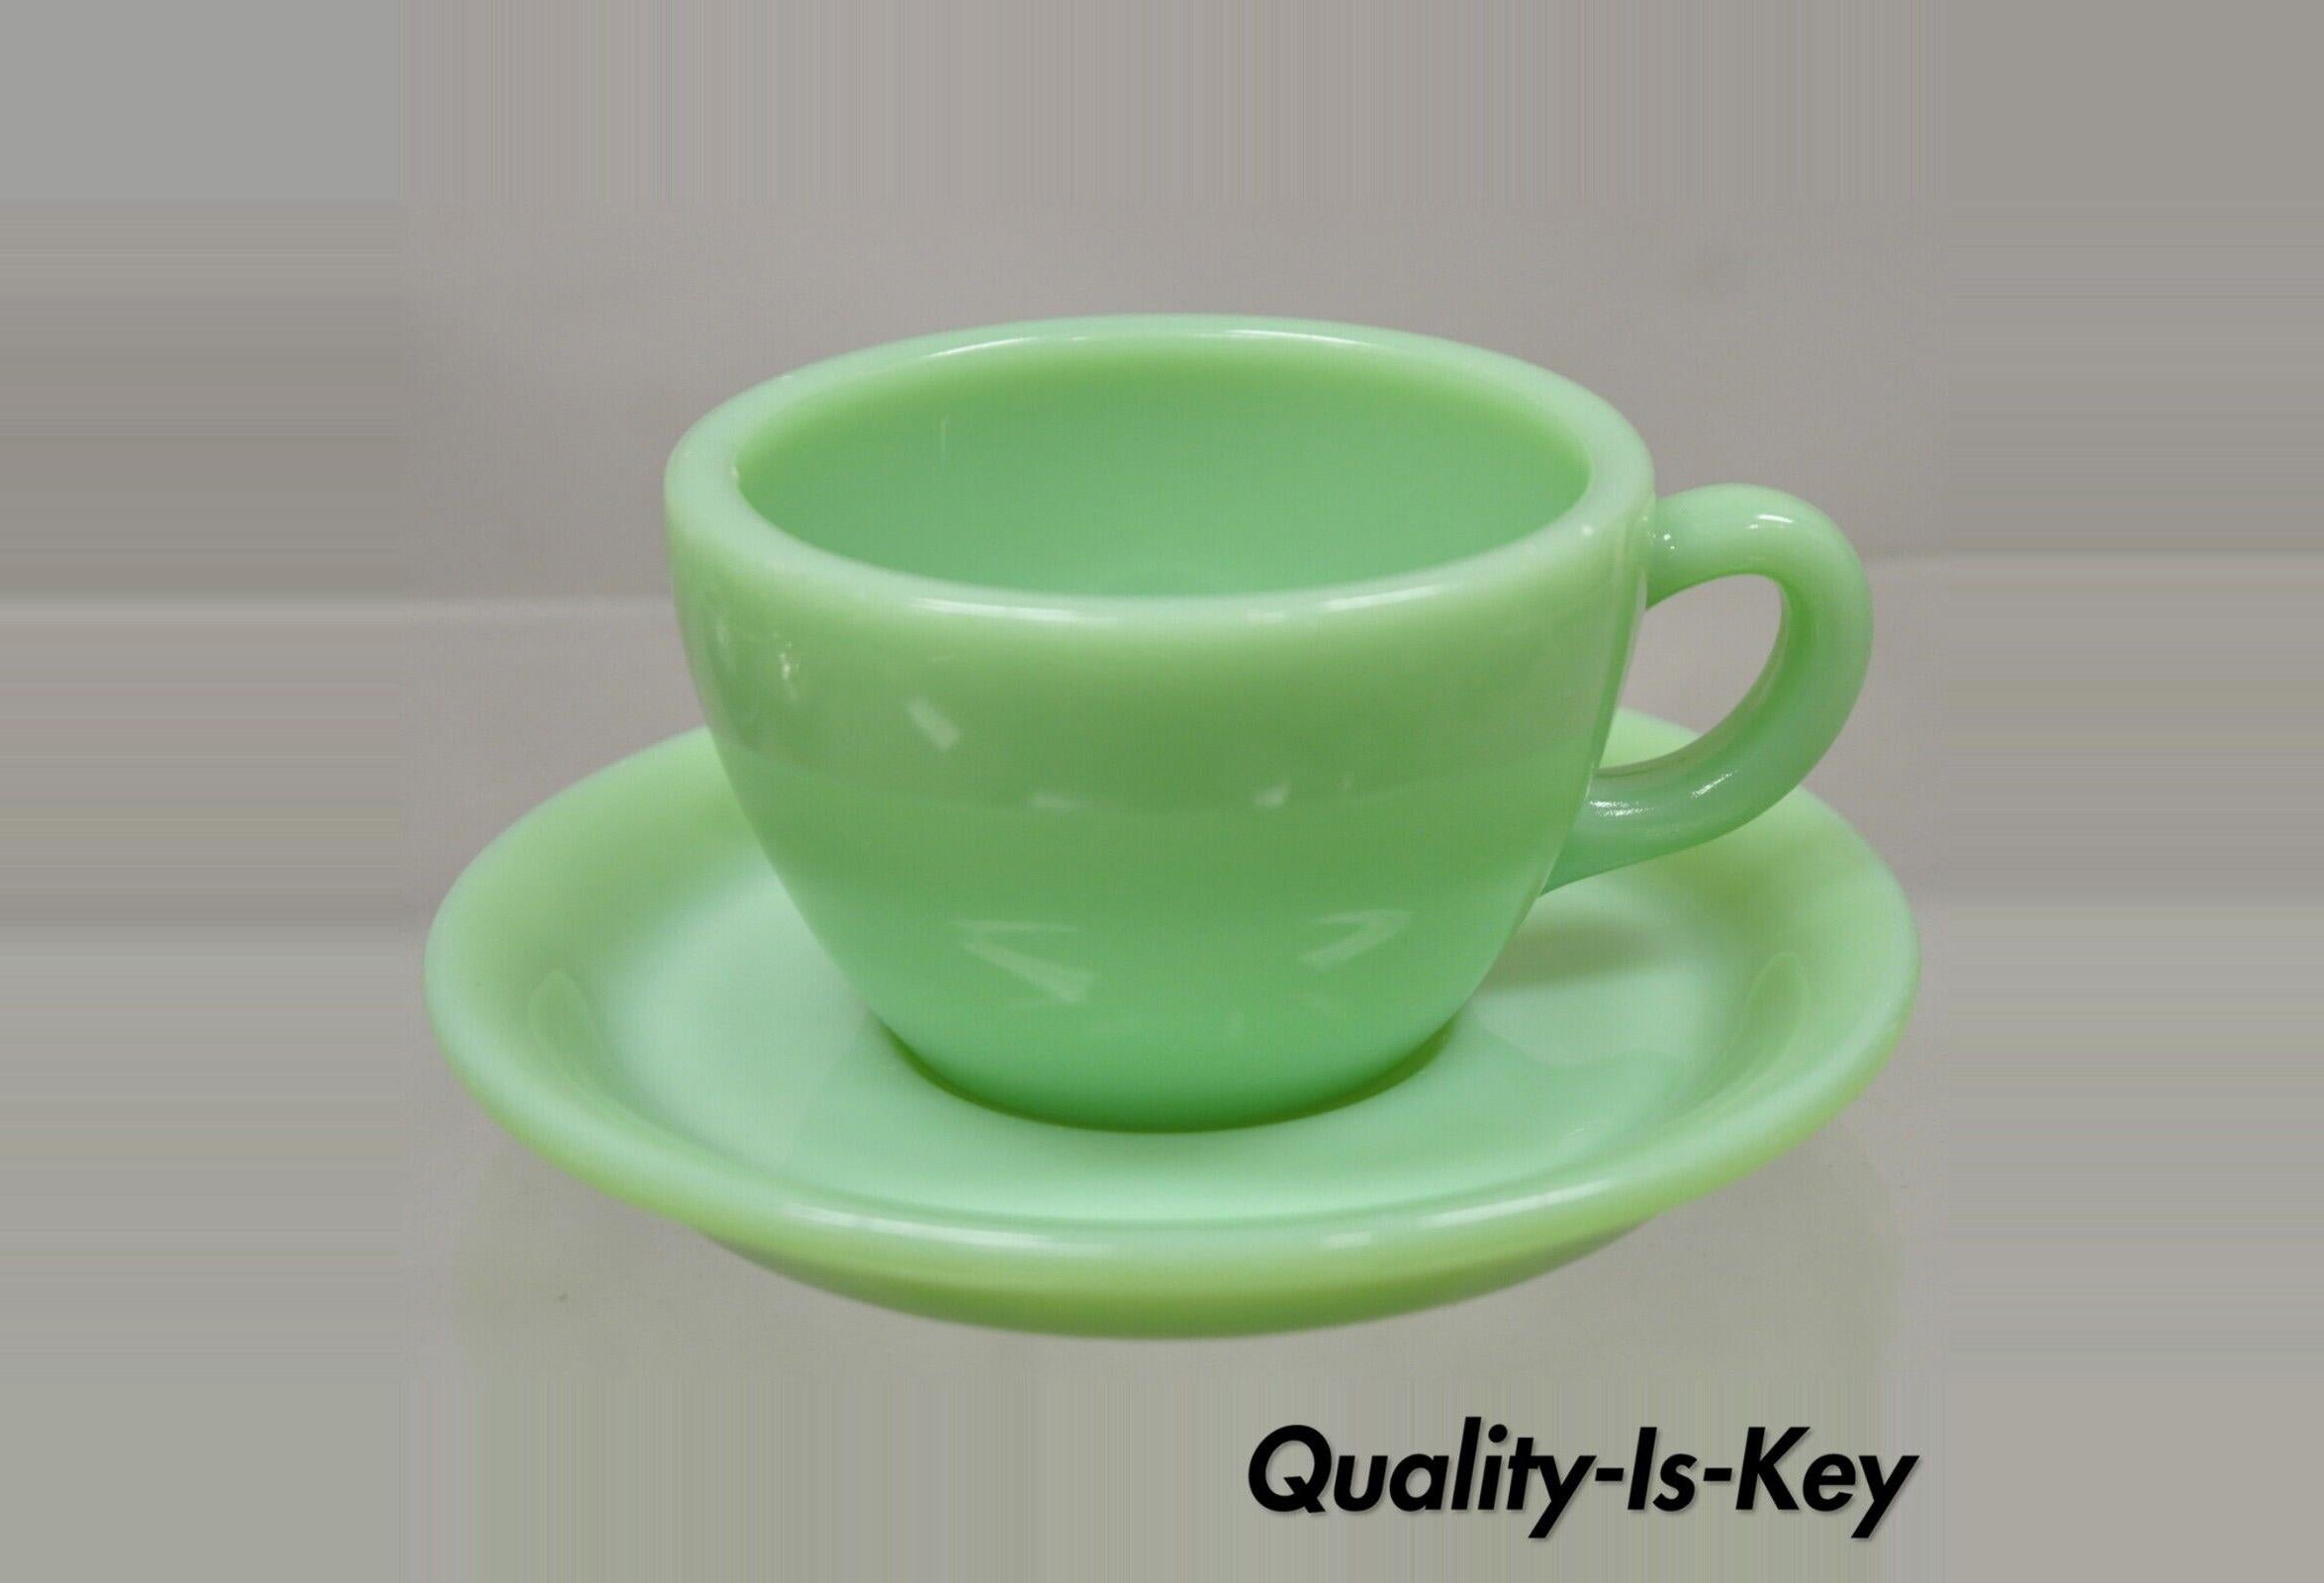 Vintage Fire King Jadeite Green Oven Ware Cup and Saucer with Damage. Circa Mid 20th Century.
Measurements: 
Cup: 2.5